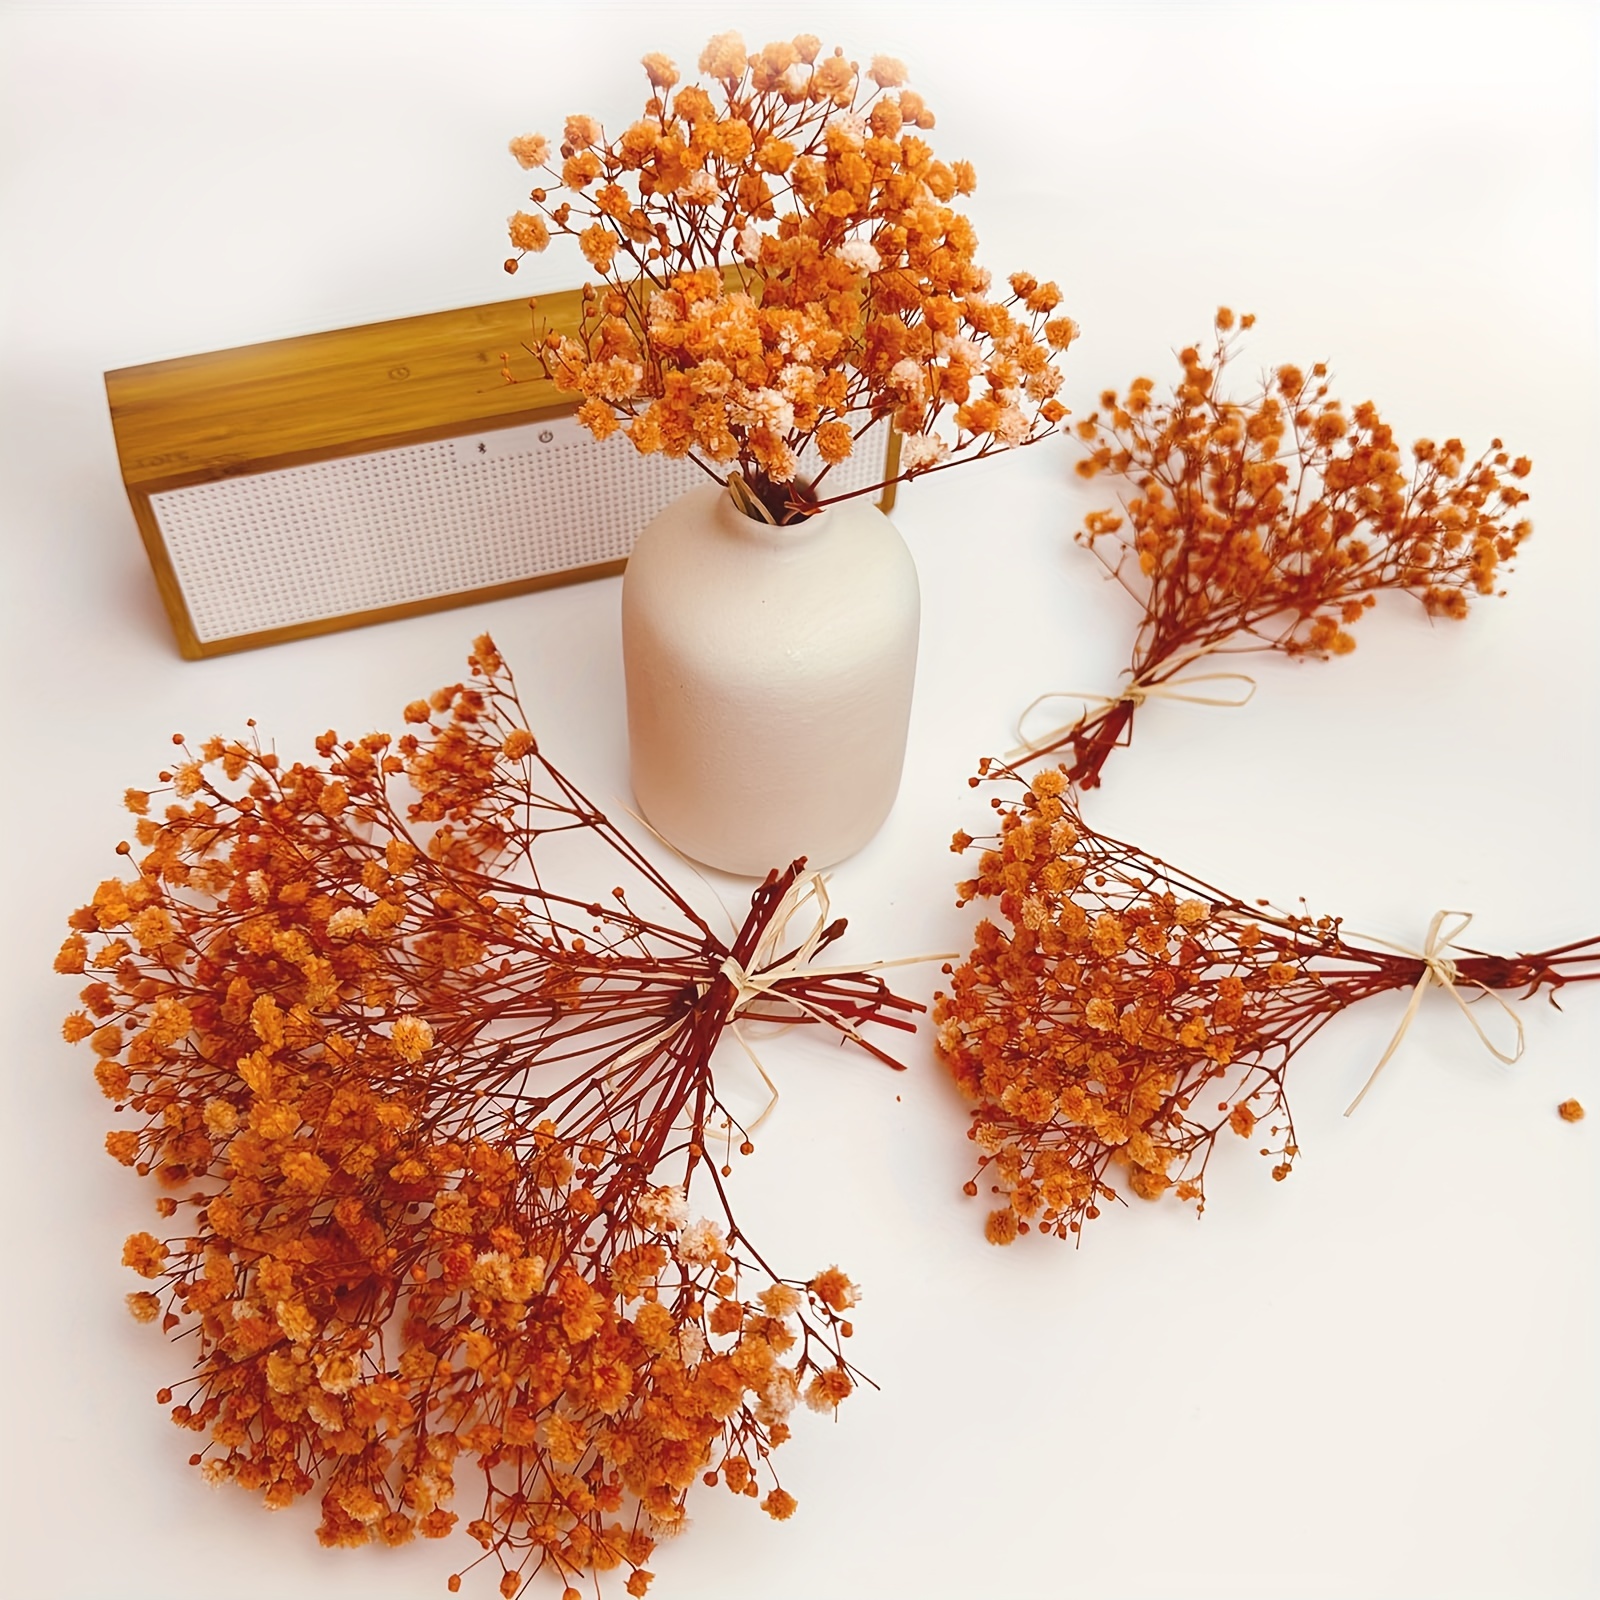 

6pcs Preserved Orange Baby's Breath, Mini Size Bouquetsgypsophila Long Lasting Flowers For Vase Home Decoration Photo Props Parties Weddings Card Making Crafts Floral, Diy Décor